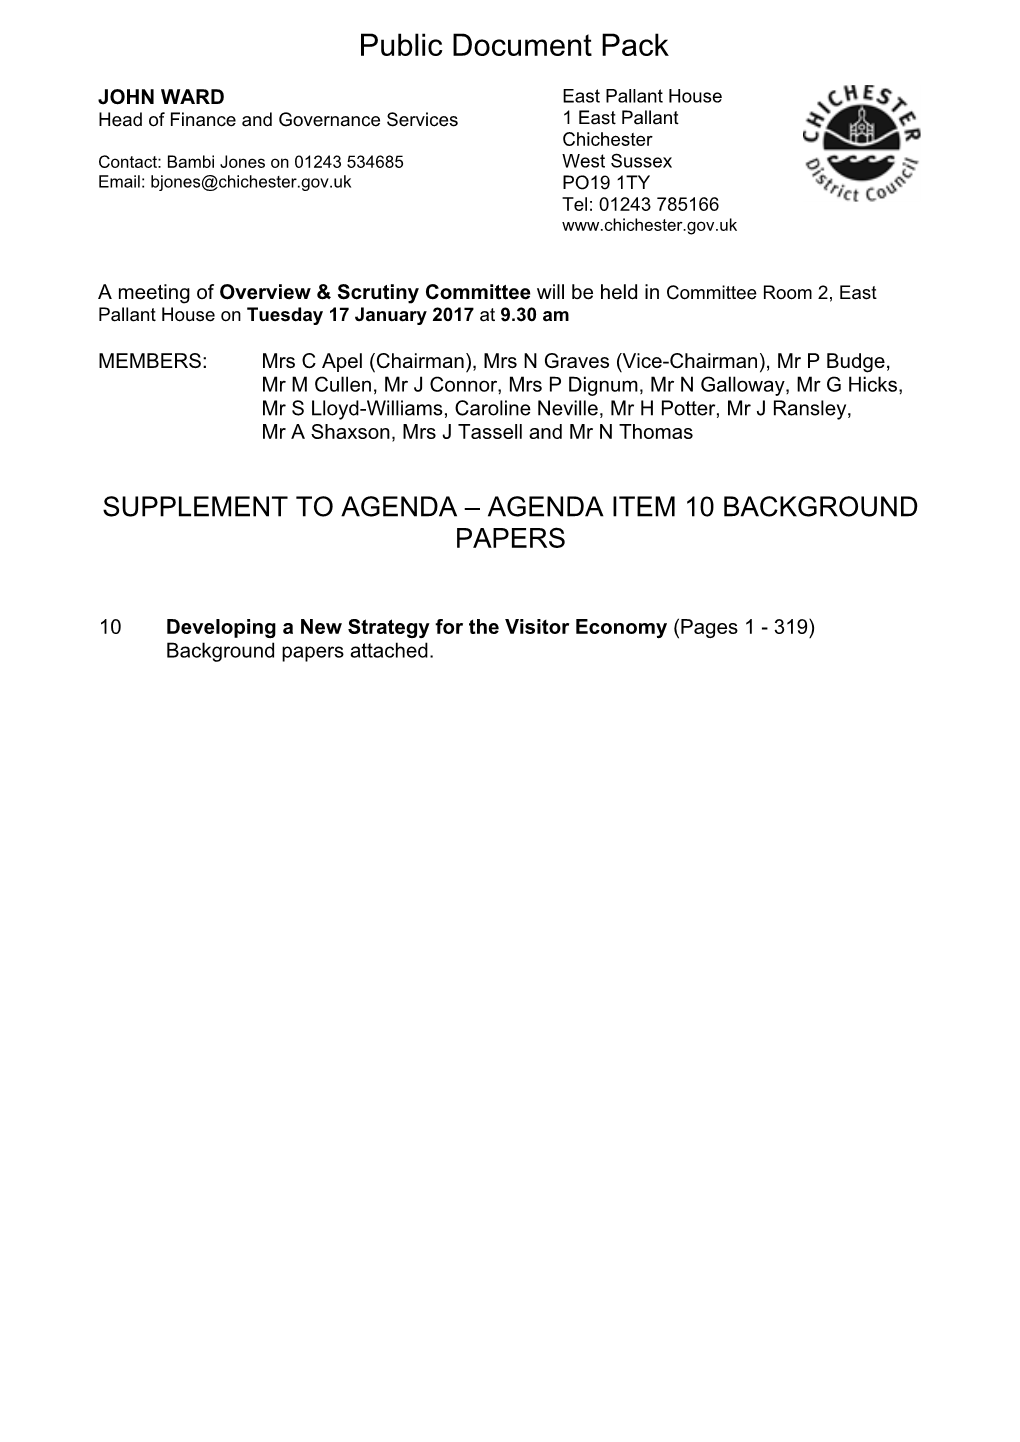 Item 10 Background Papers Agenda Supplement for Overview & Scrutiny